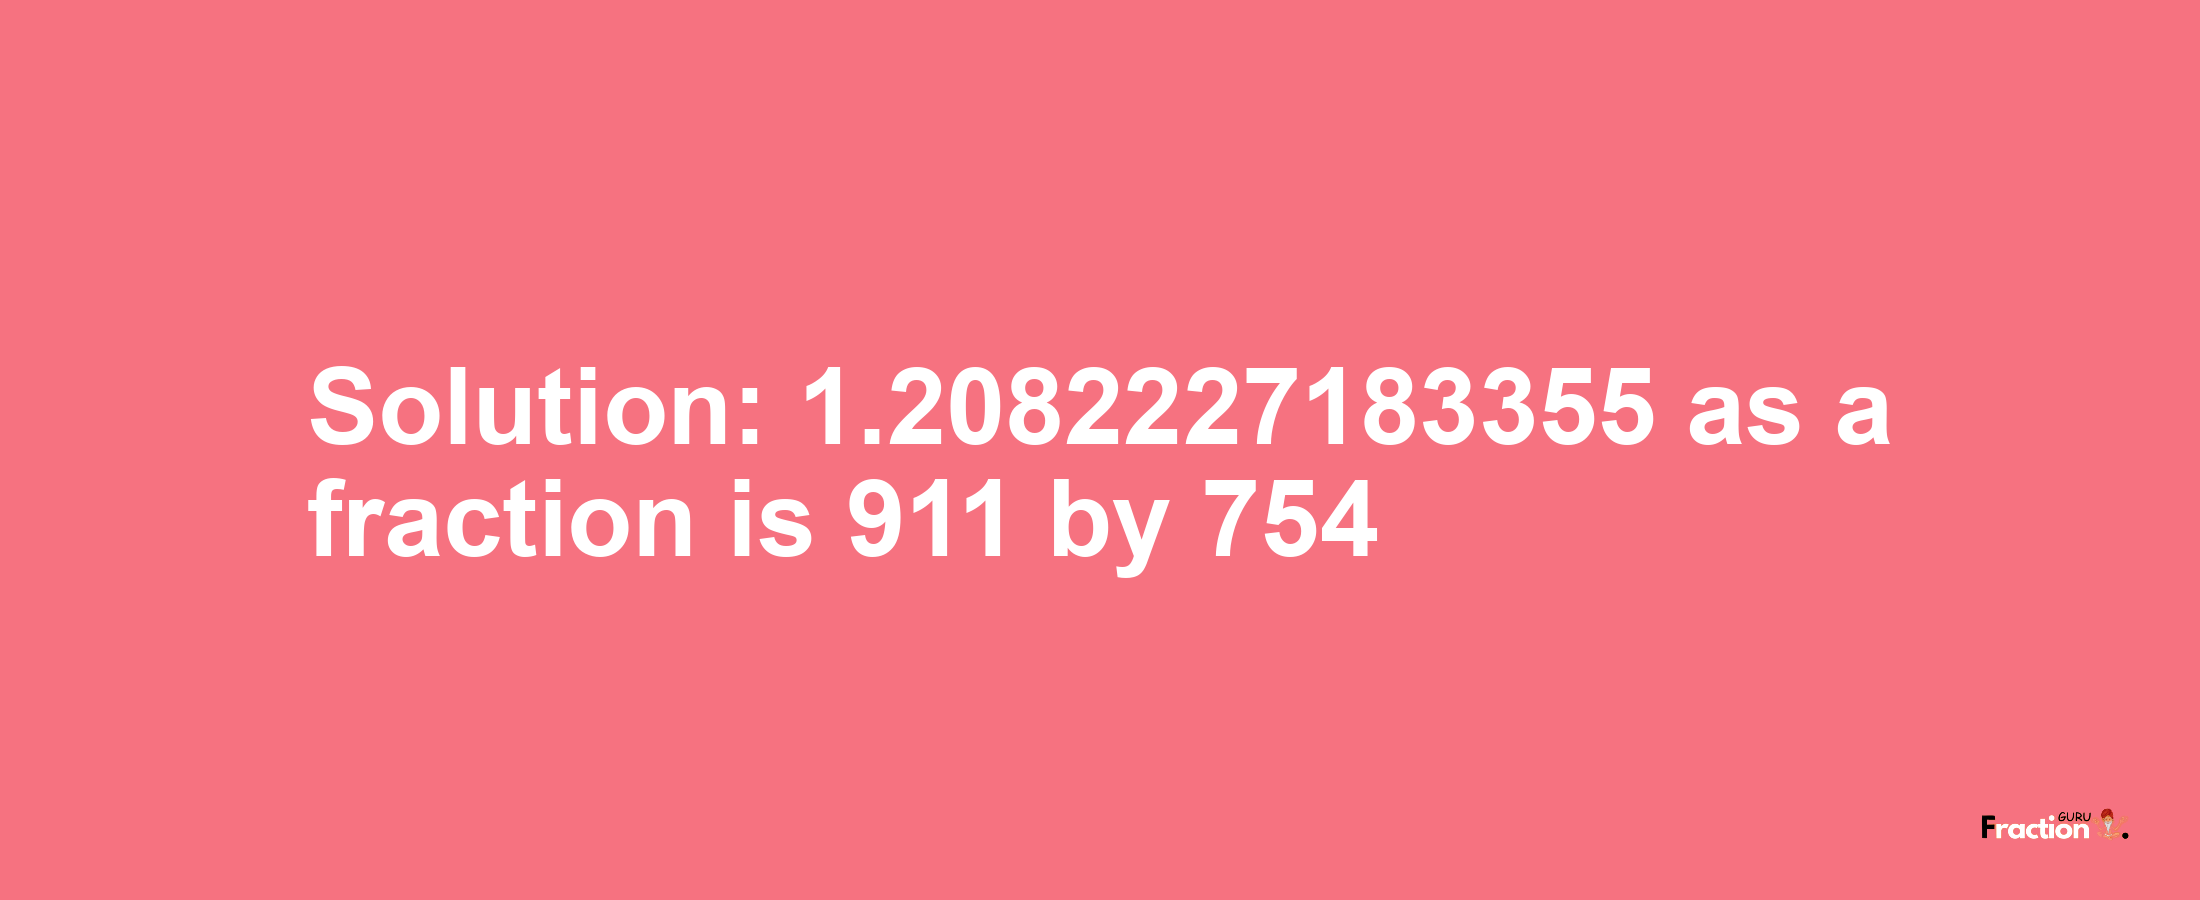 Solution:1.2082227183355 as a fraction is 911/754